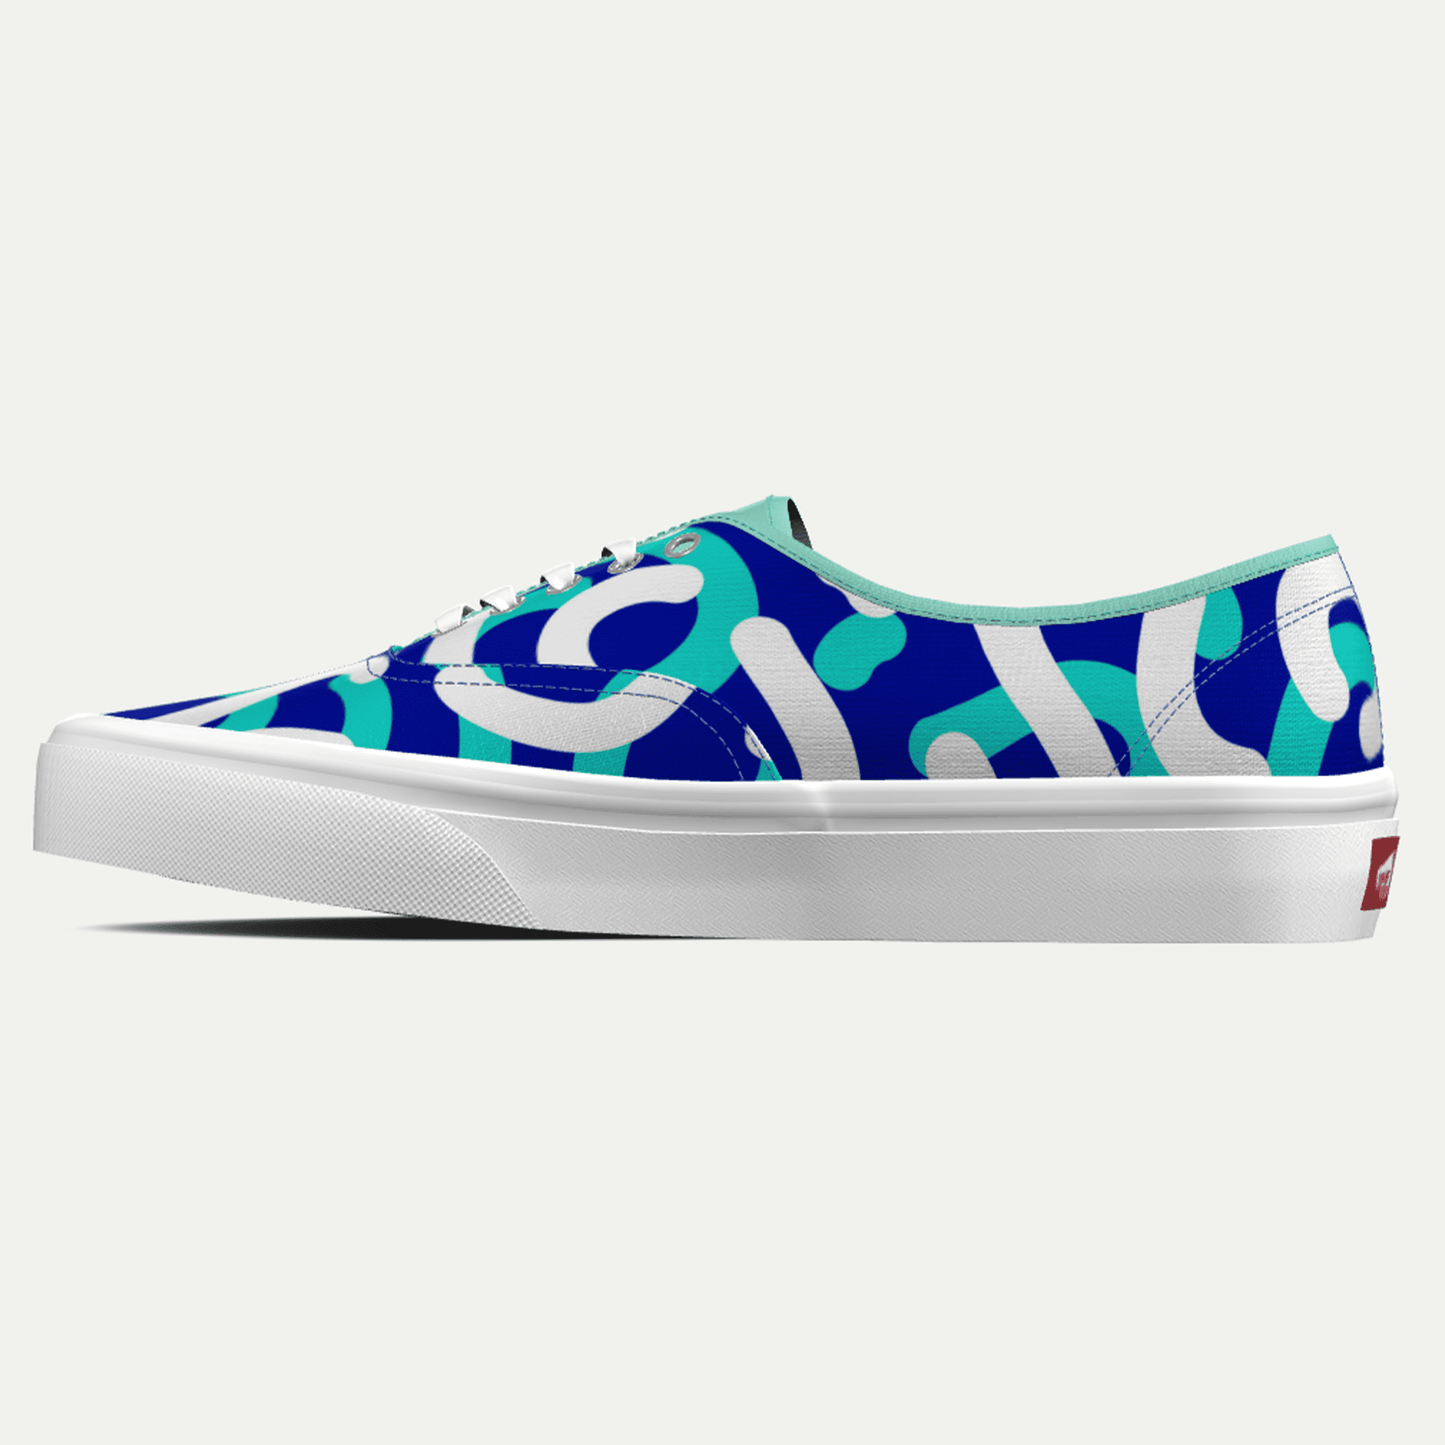 Funky Yeti x Vans Customs Authentic Shoes - Bright Blue Curves